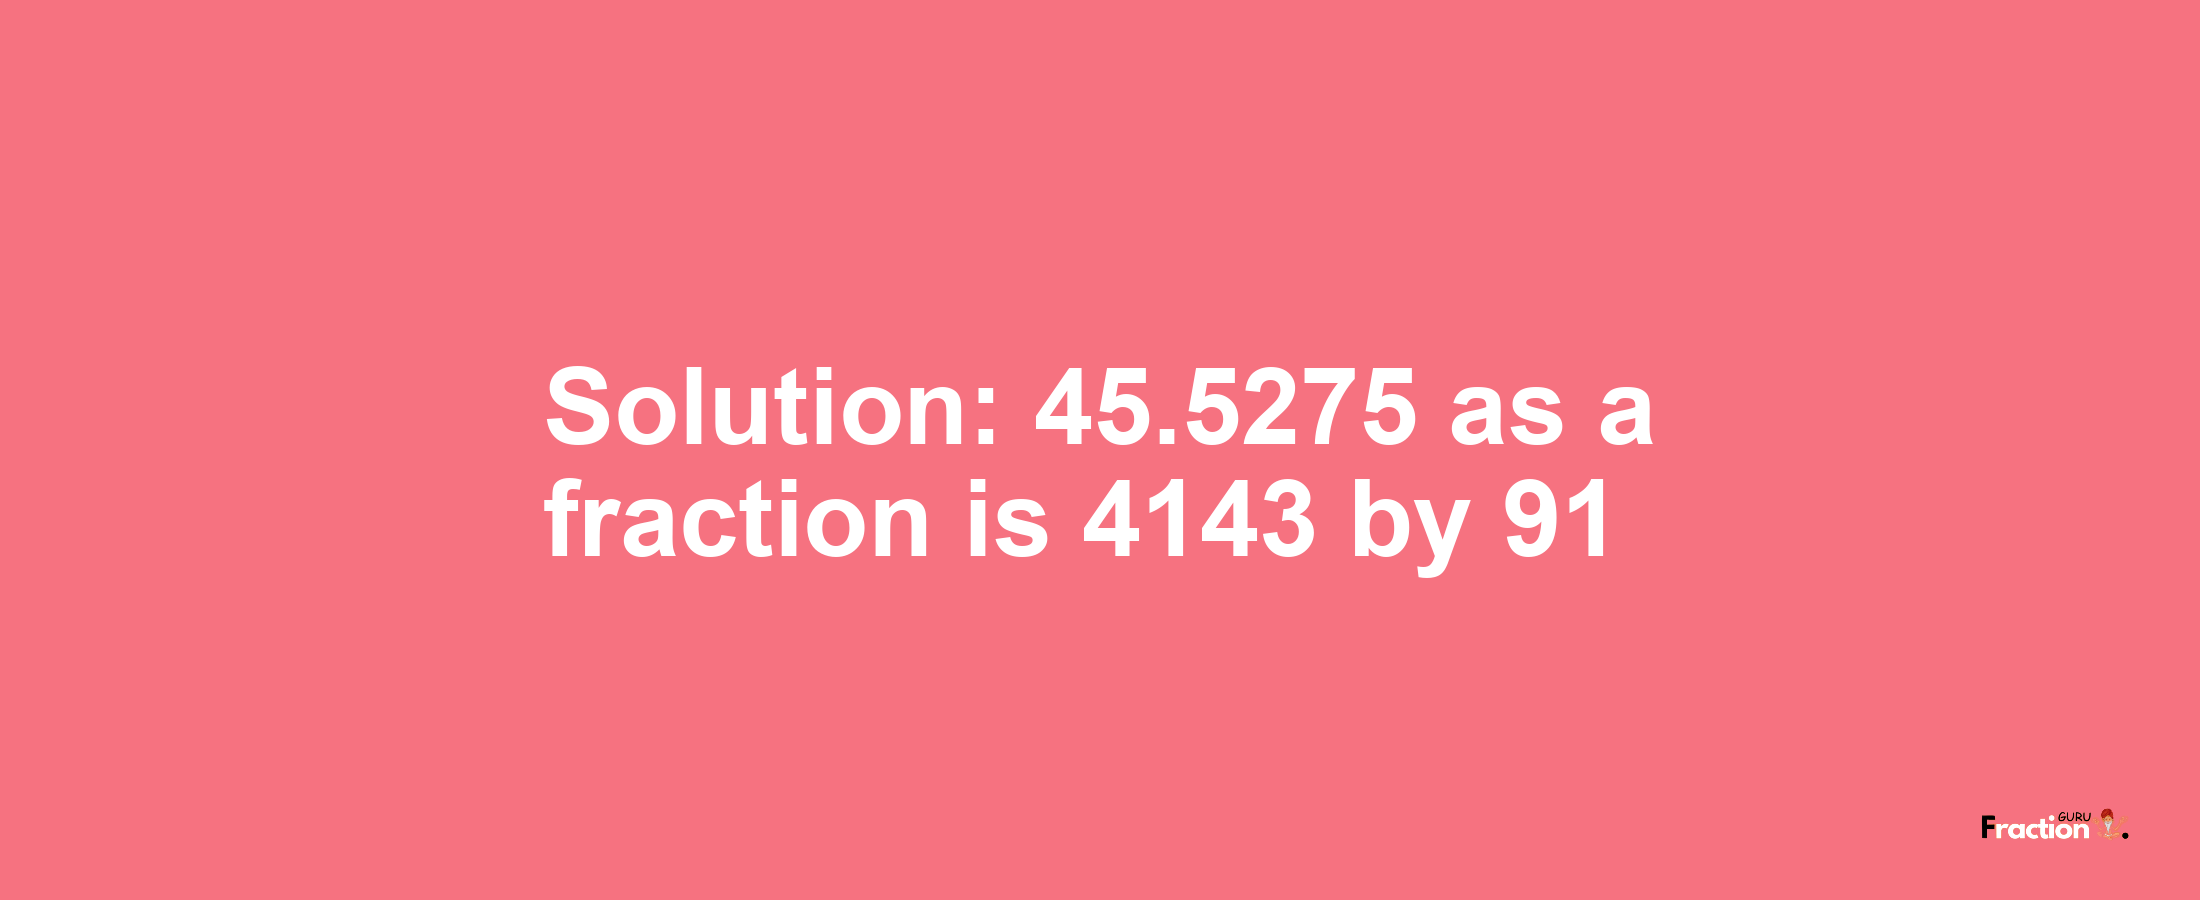 Solution:45.5275 as a fraction is 4143/91